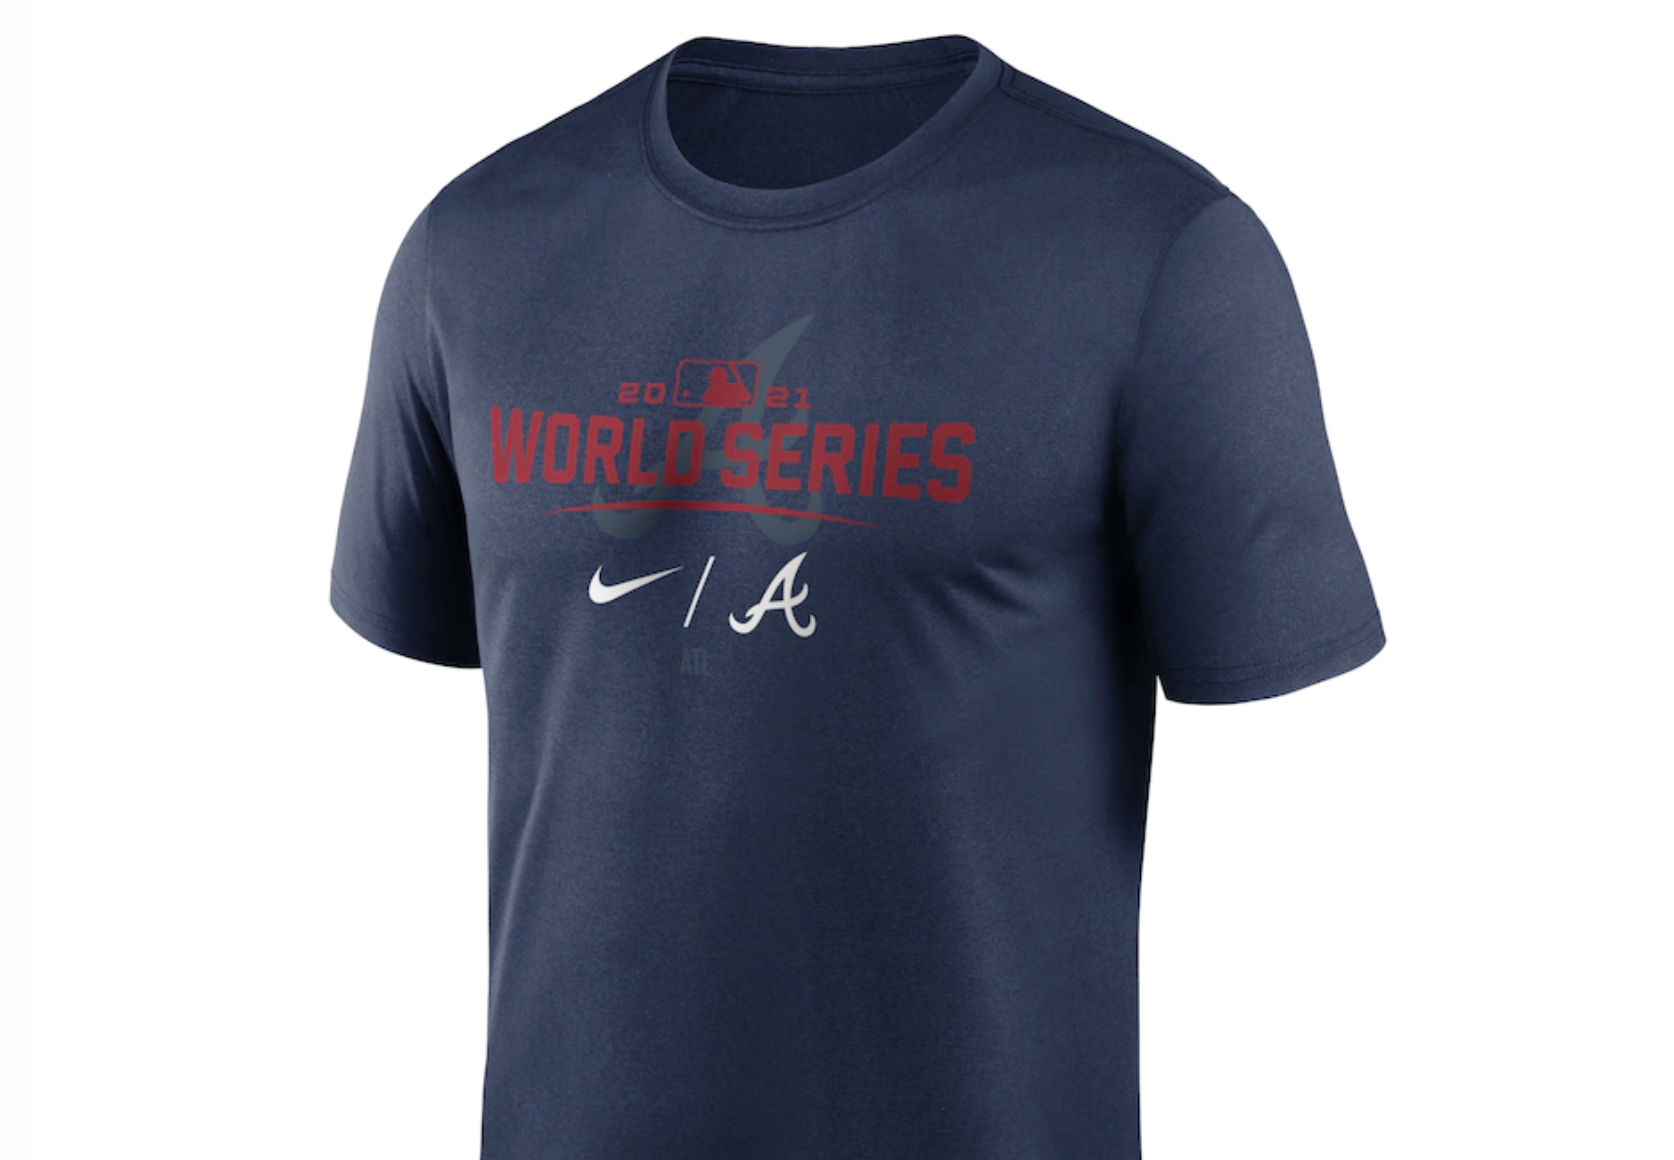 MLB World Series gear: 2021 Houston Astros vs. Atlanta Braves shirts, hats,  collectibles are here 